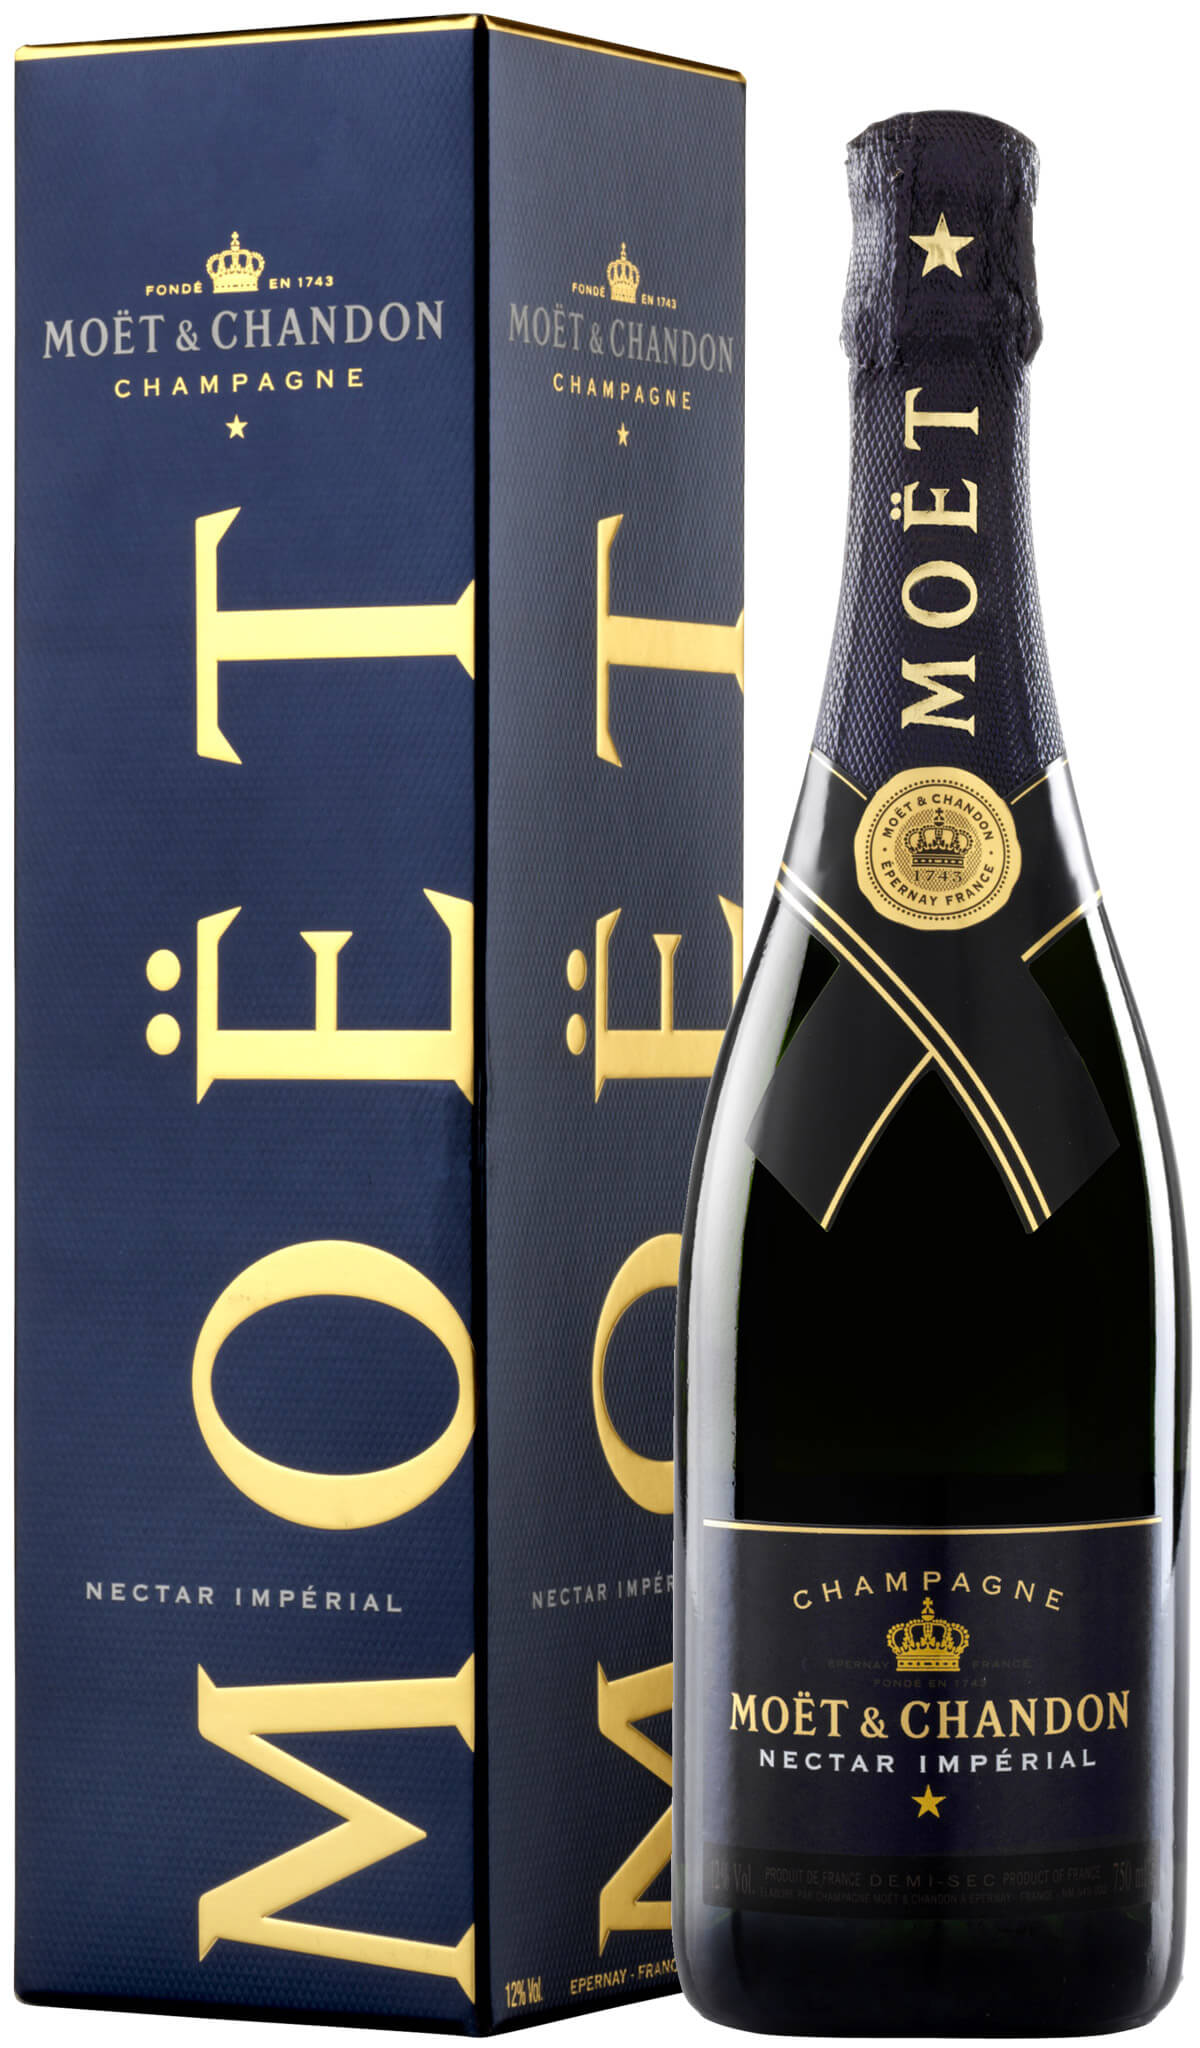 Find out more or buy Moët & Chandon Nectar Impérial NV 750mL online at Wine Sellers Direct - Australia’s independent liquor specialists.